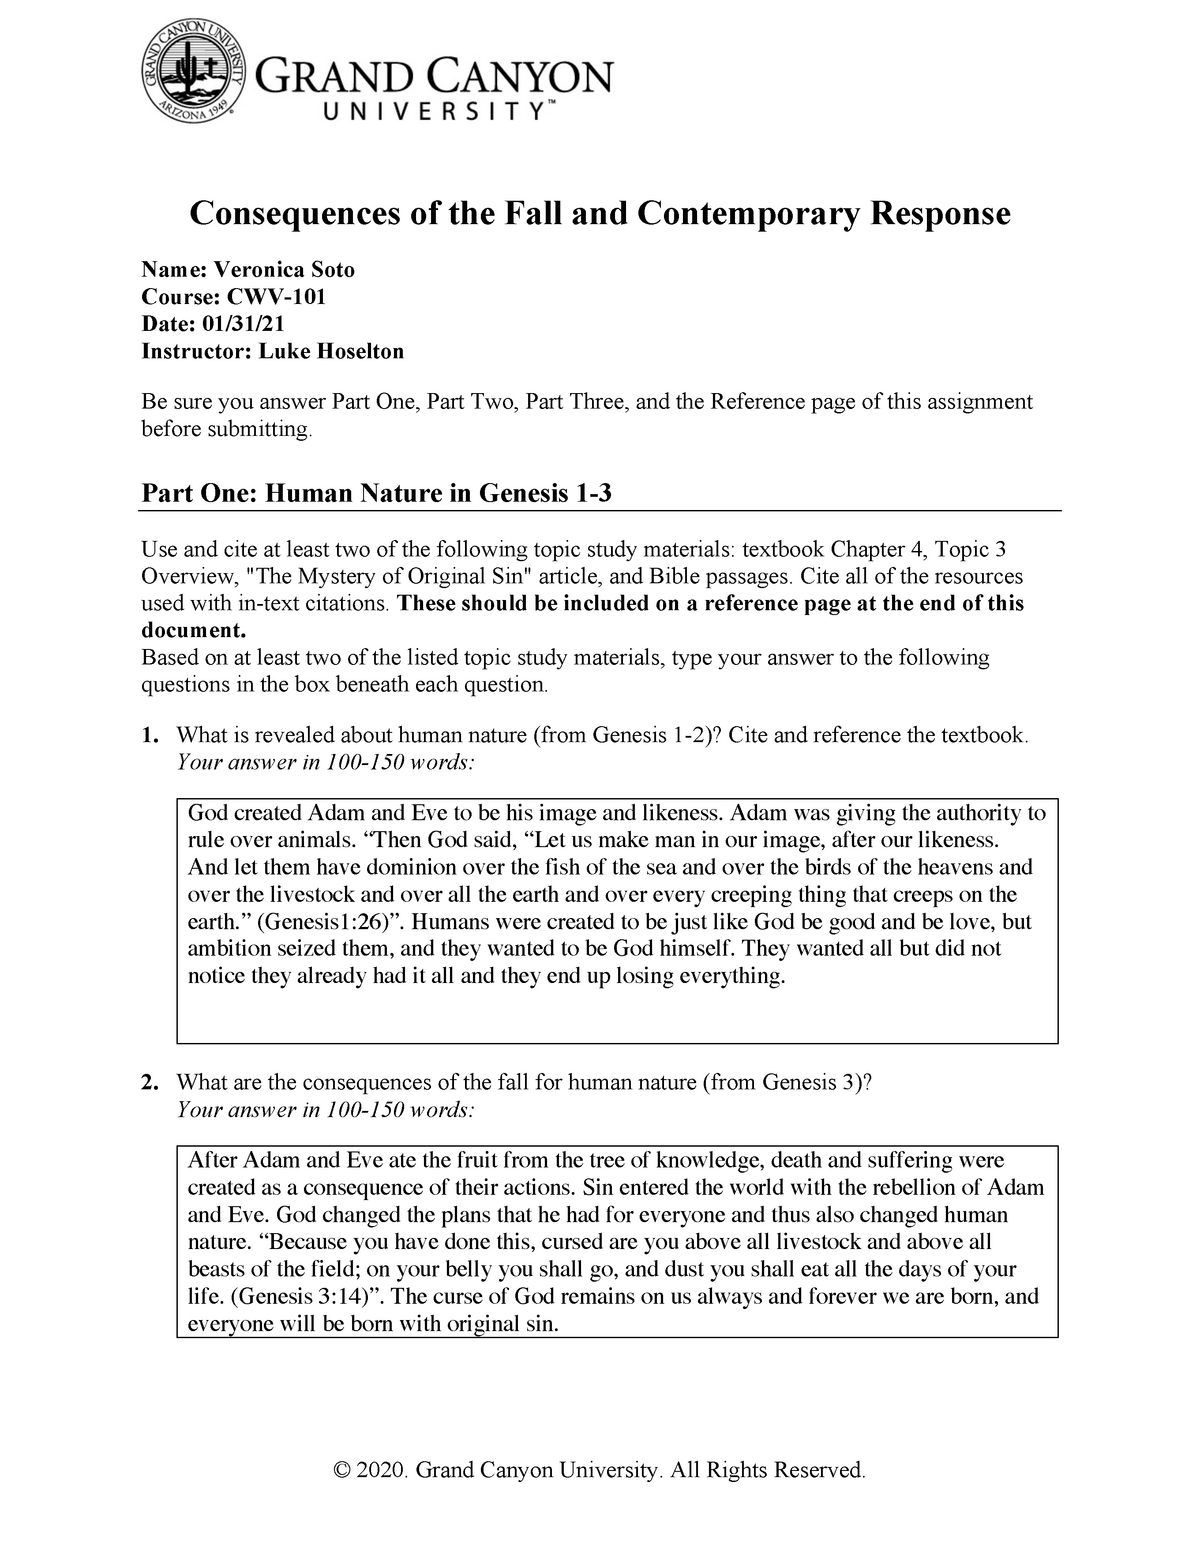 Cwv 101 301 Rs T3conseq Of The Fall Contemporary Response Online Consequences Of The Fall And Studocu